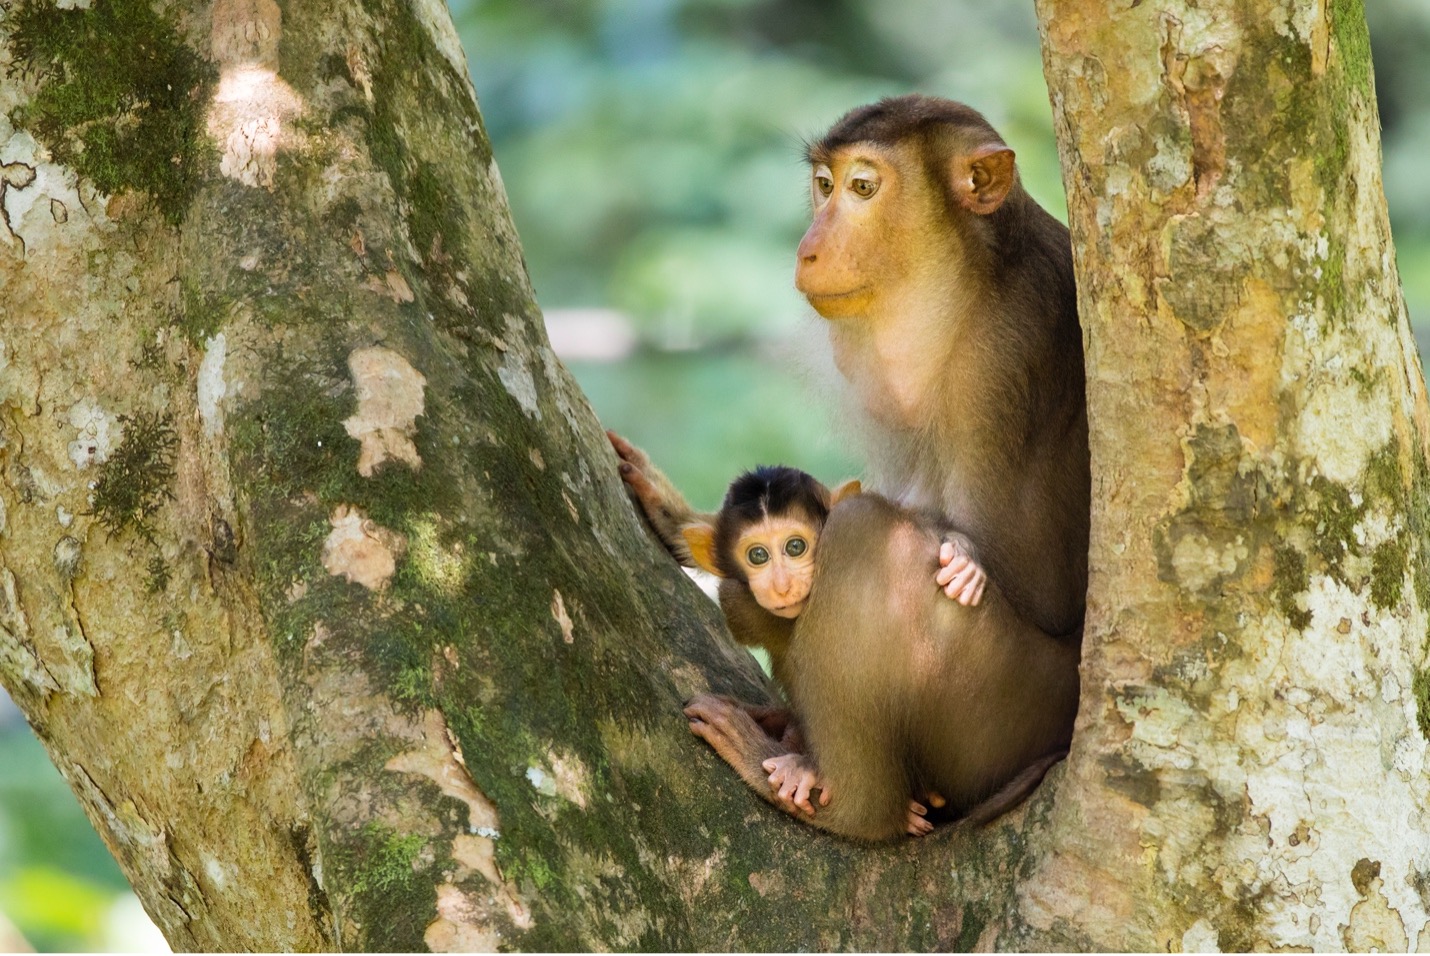 Macaque mother and baby sit in a tree in Borneo